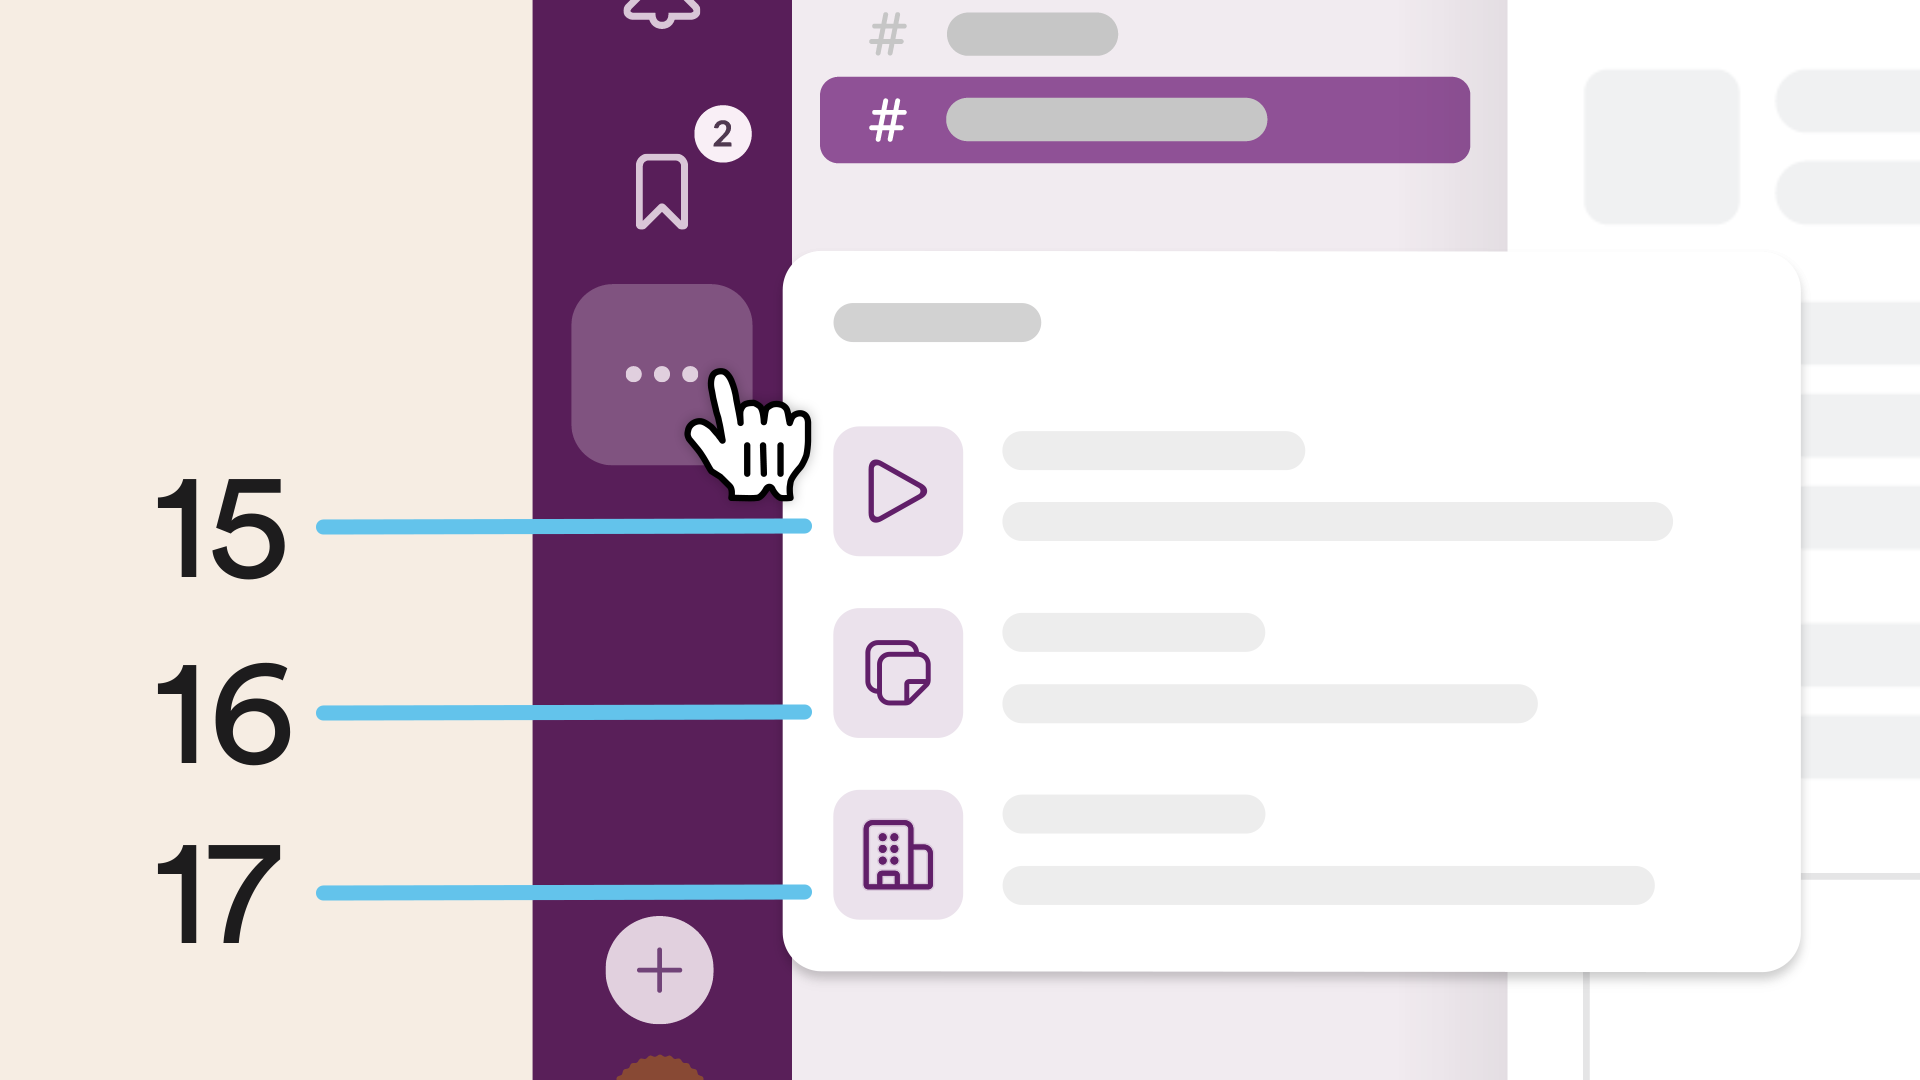 View of the Slack interface, including the automations, canvases and external connections